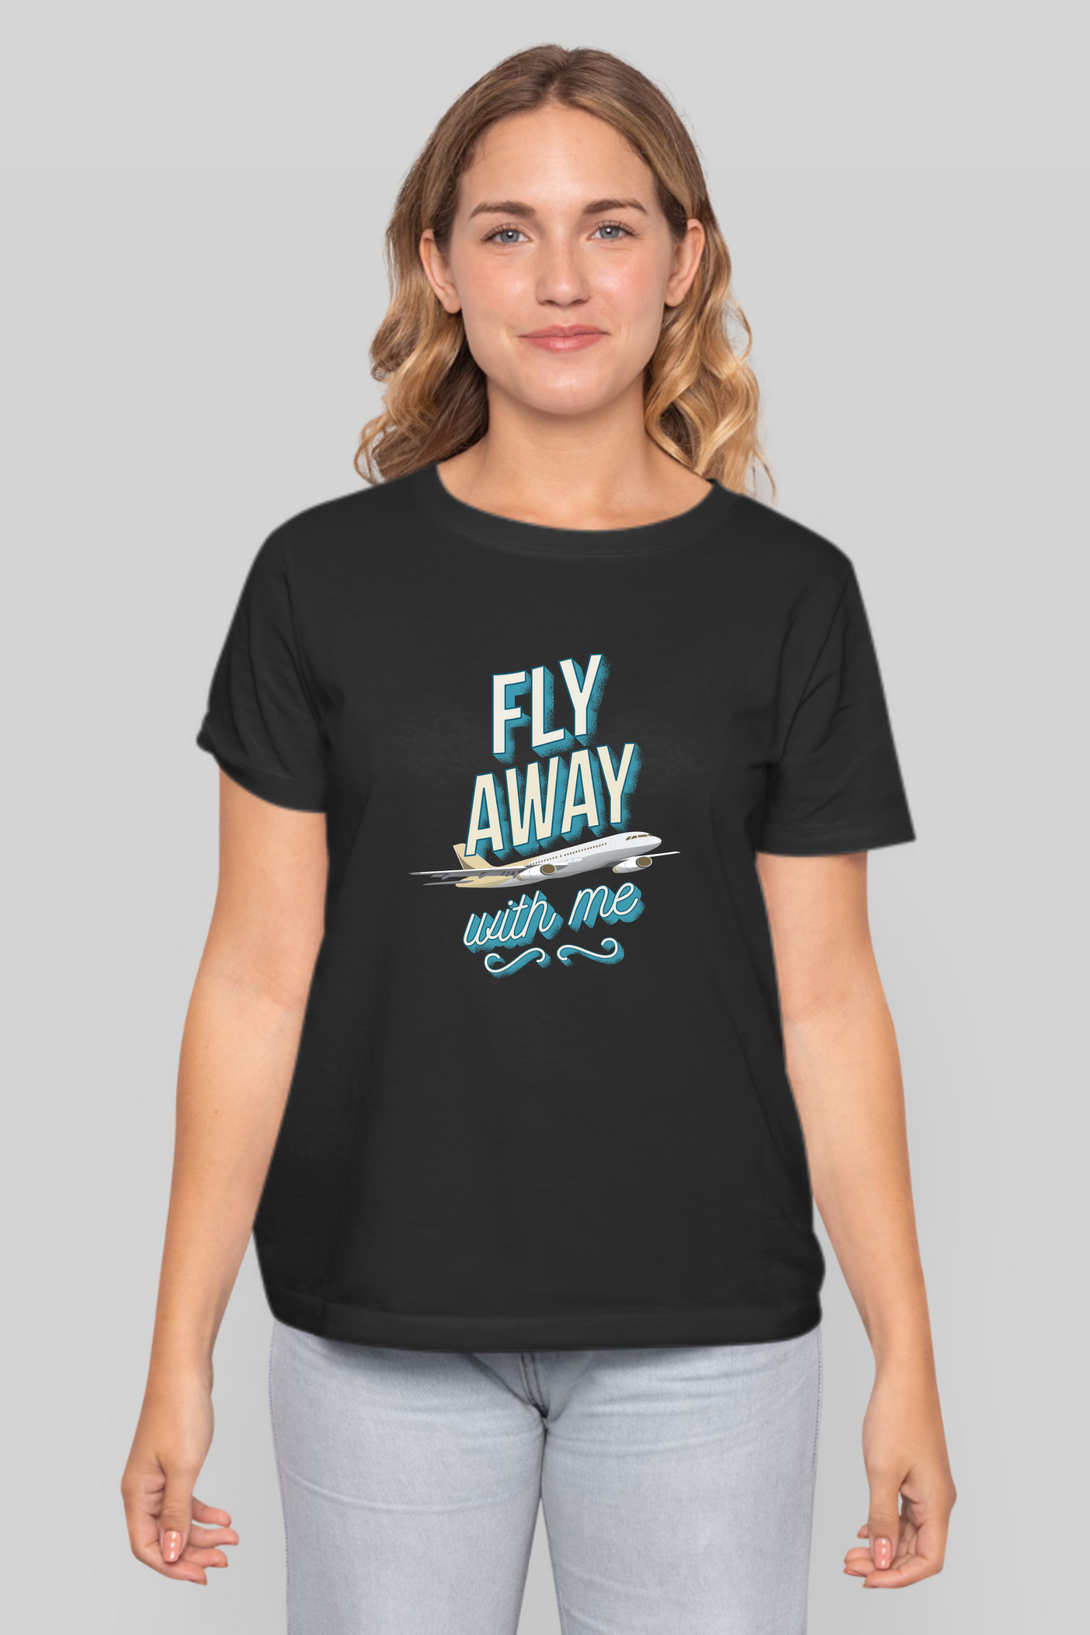 Fly Away With Me Printed T-Shirt For Women - WowWaves - 8